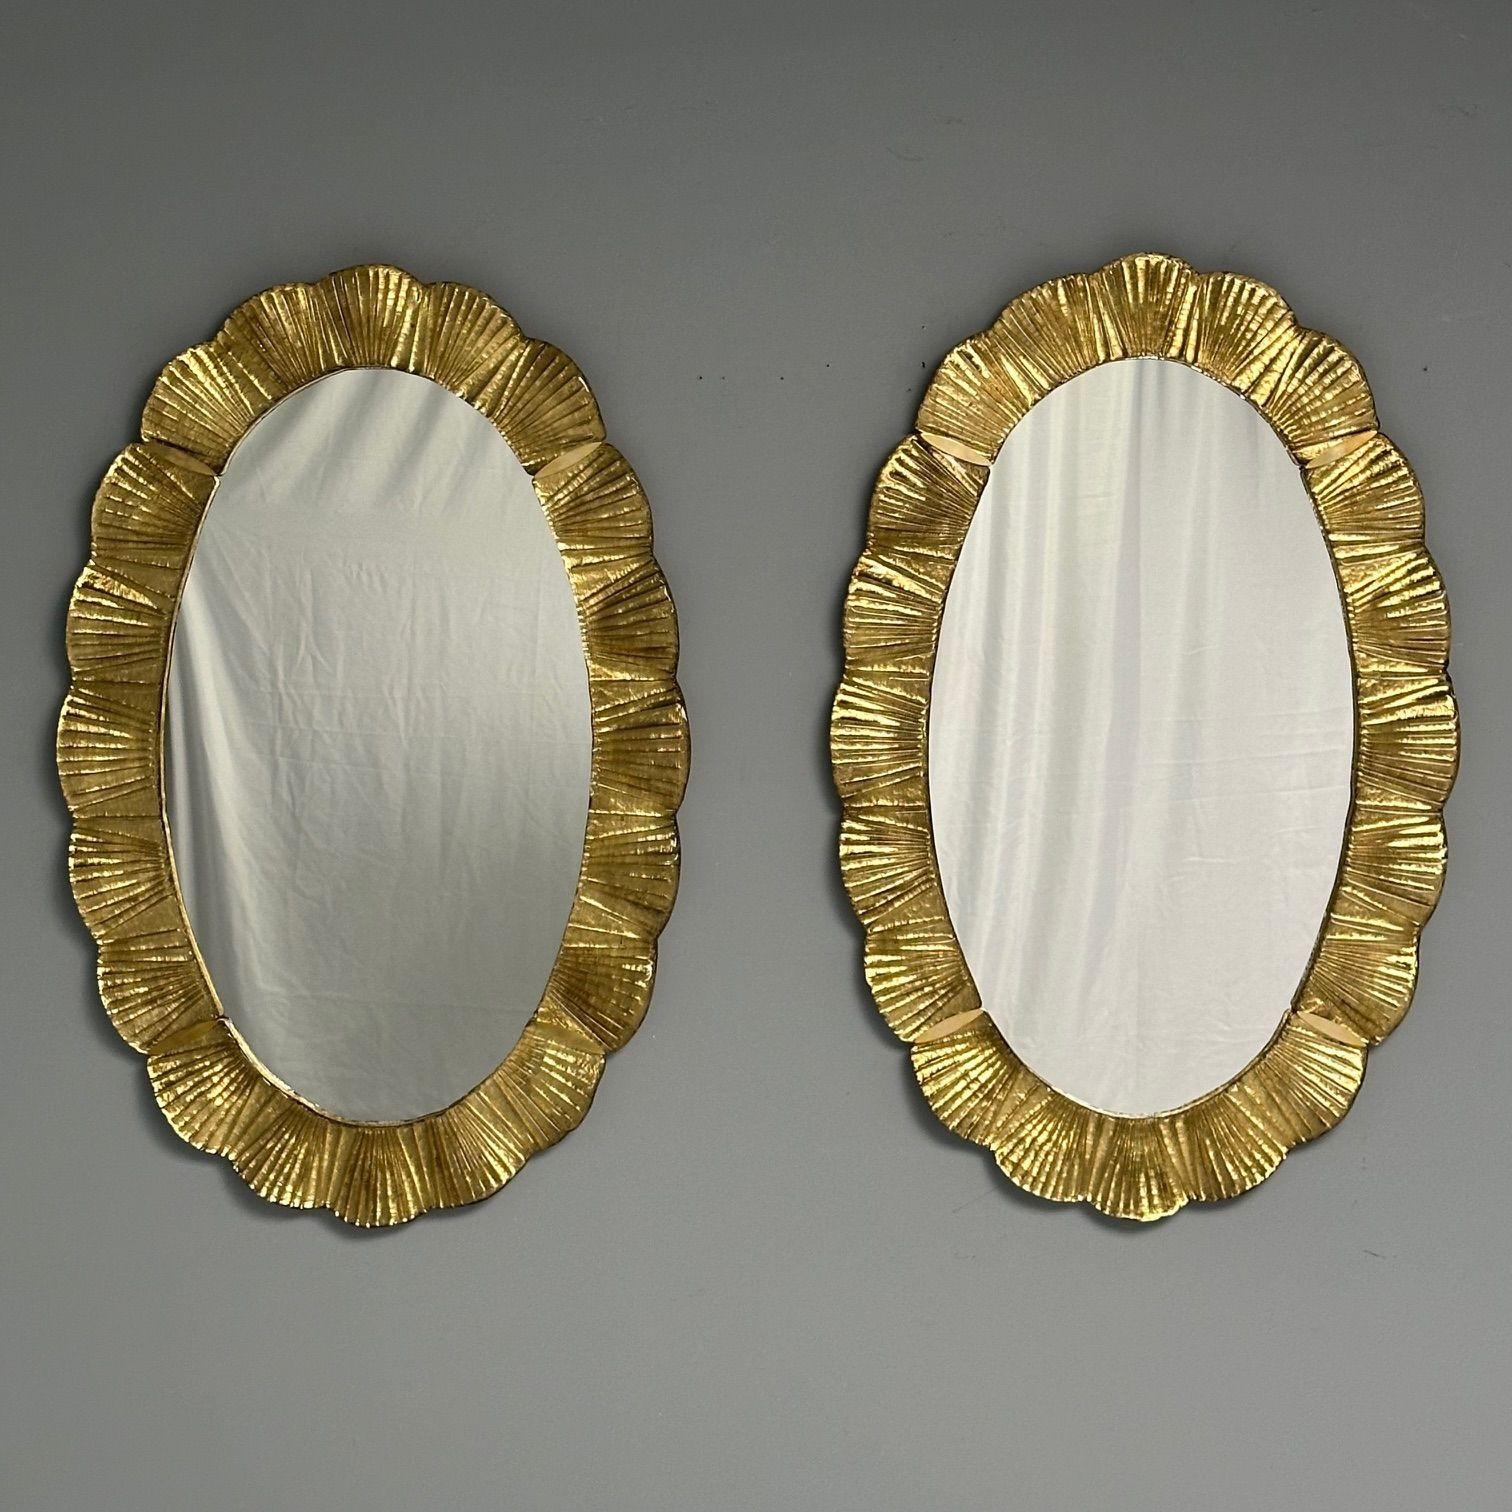 Contemporary, Oval Wall Mirrors with Scallop Motif, Murano Glass, Gilt Gold, Italy, 2023

Pair of rectangular wall mirrors designed and handcrafted in a small workshop in Venice, Italy. Each mirror has a silver shell motif Murano glass frame and